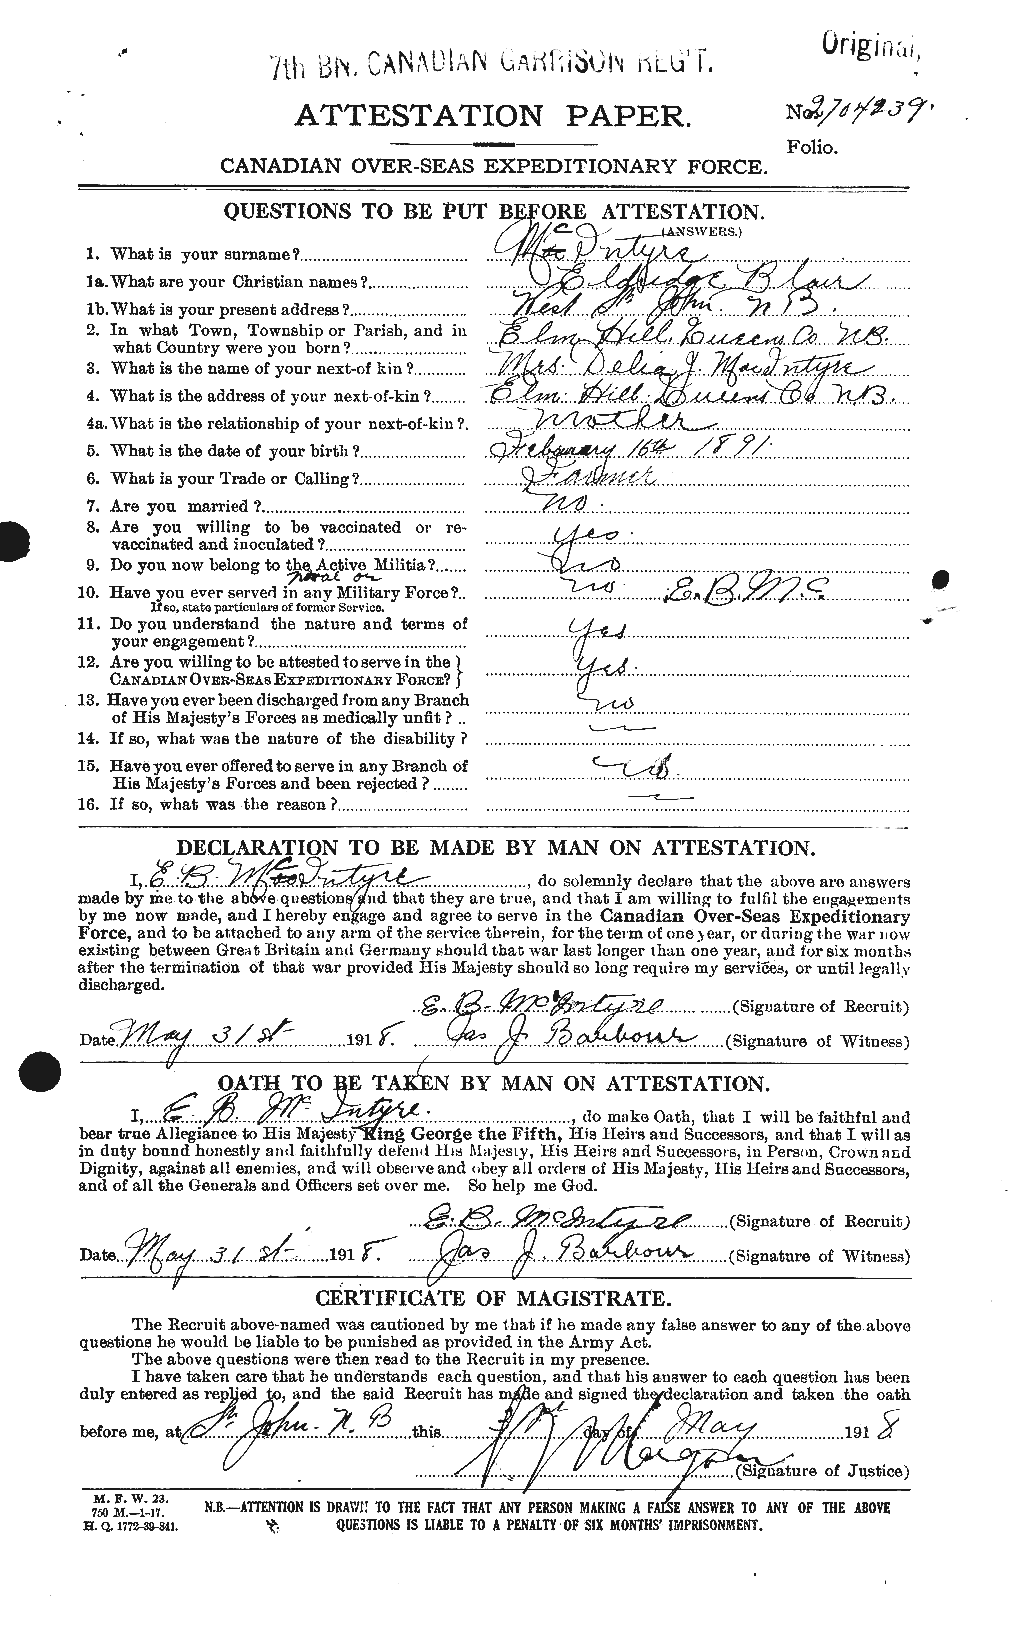 Personnel Records of the First World War - CEF 527358a